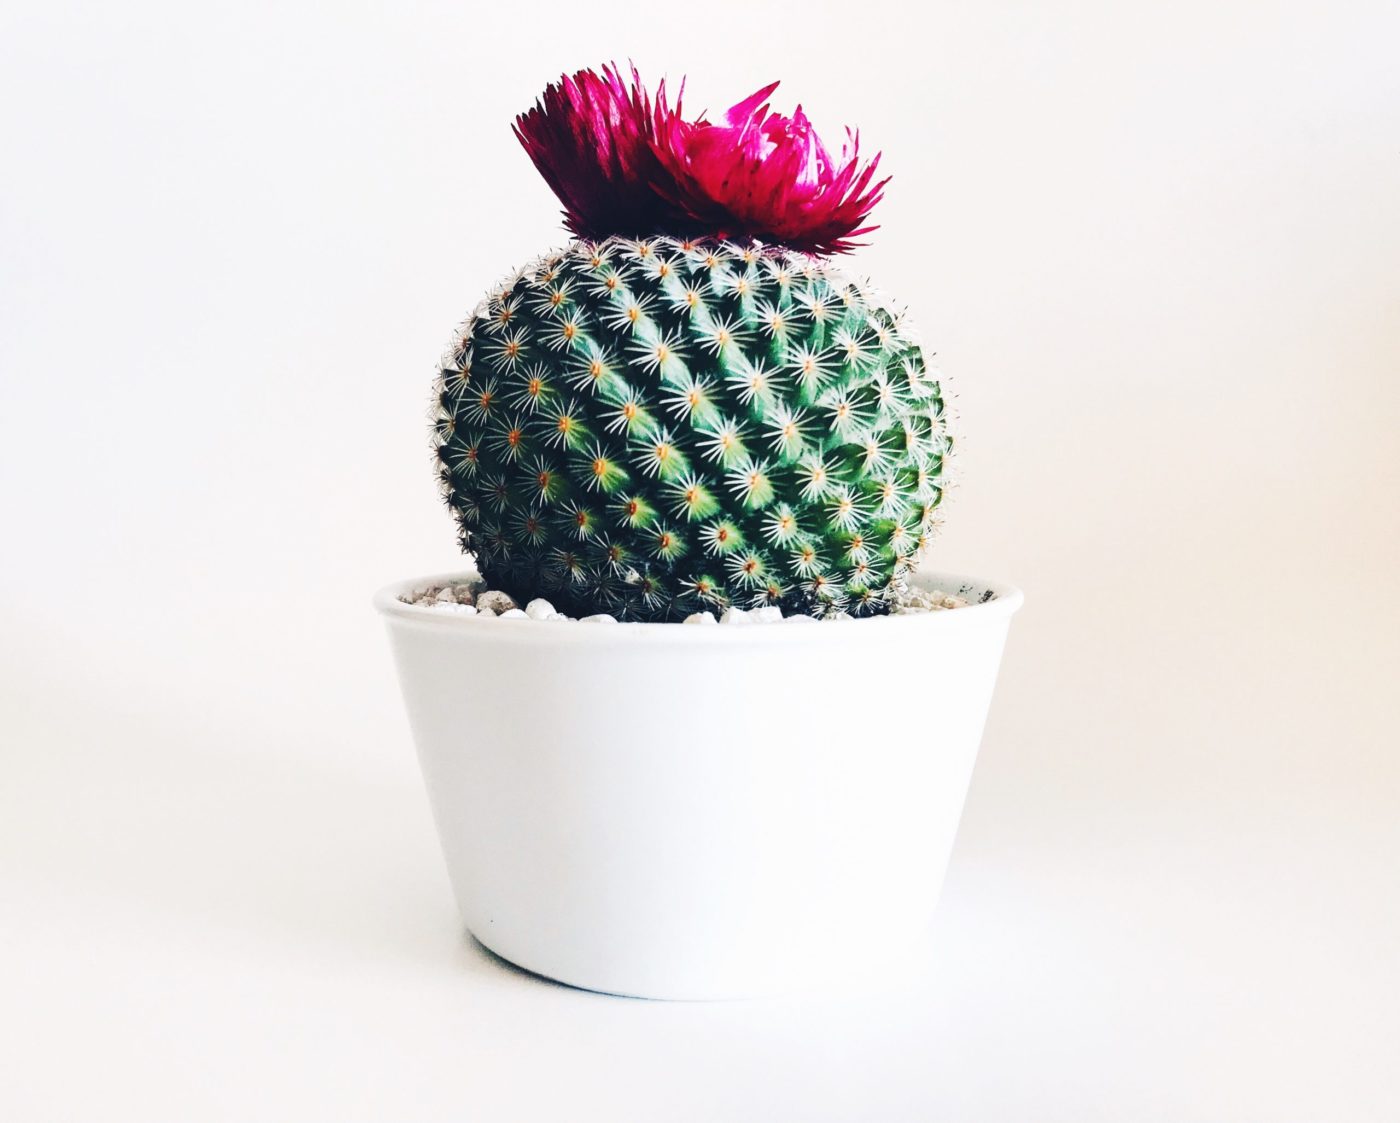 A cactus with a magenta flower on top, planted inside a white ceramic pot.